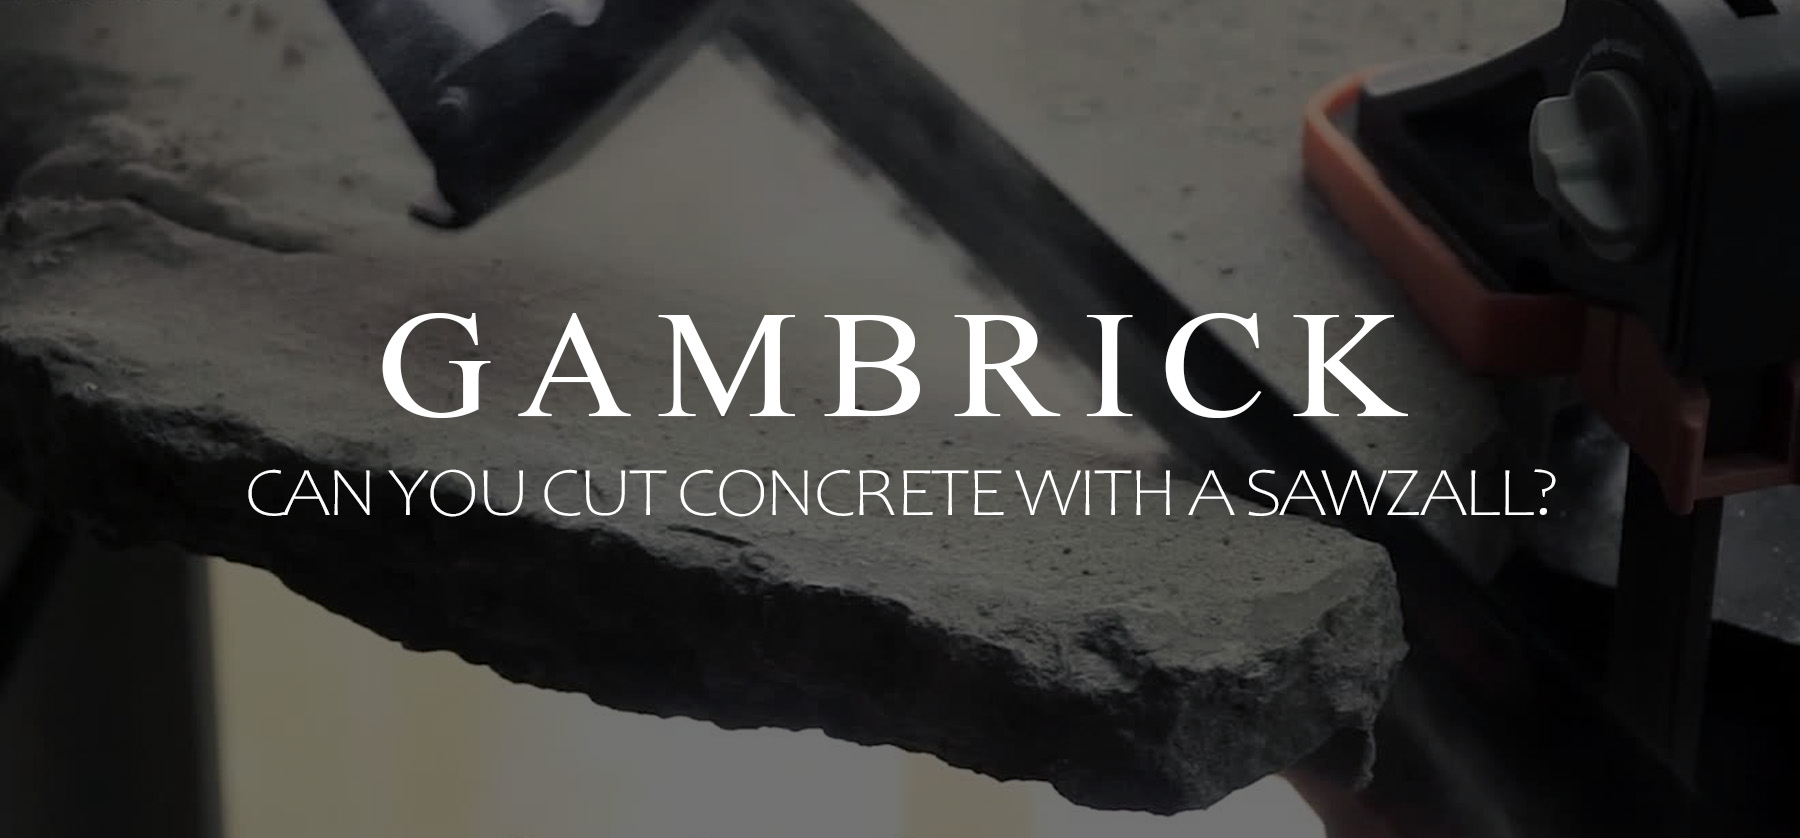 can you cut concrete with a sawzall banner